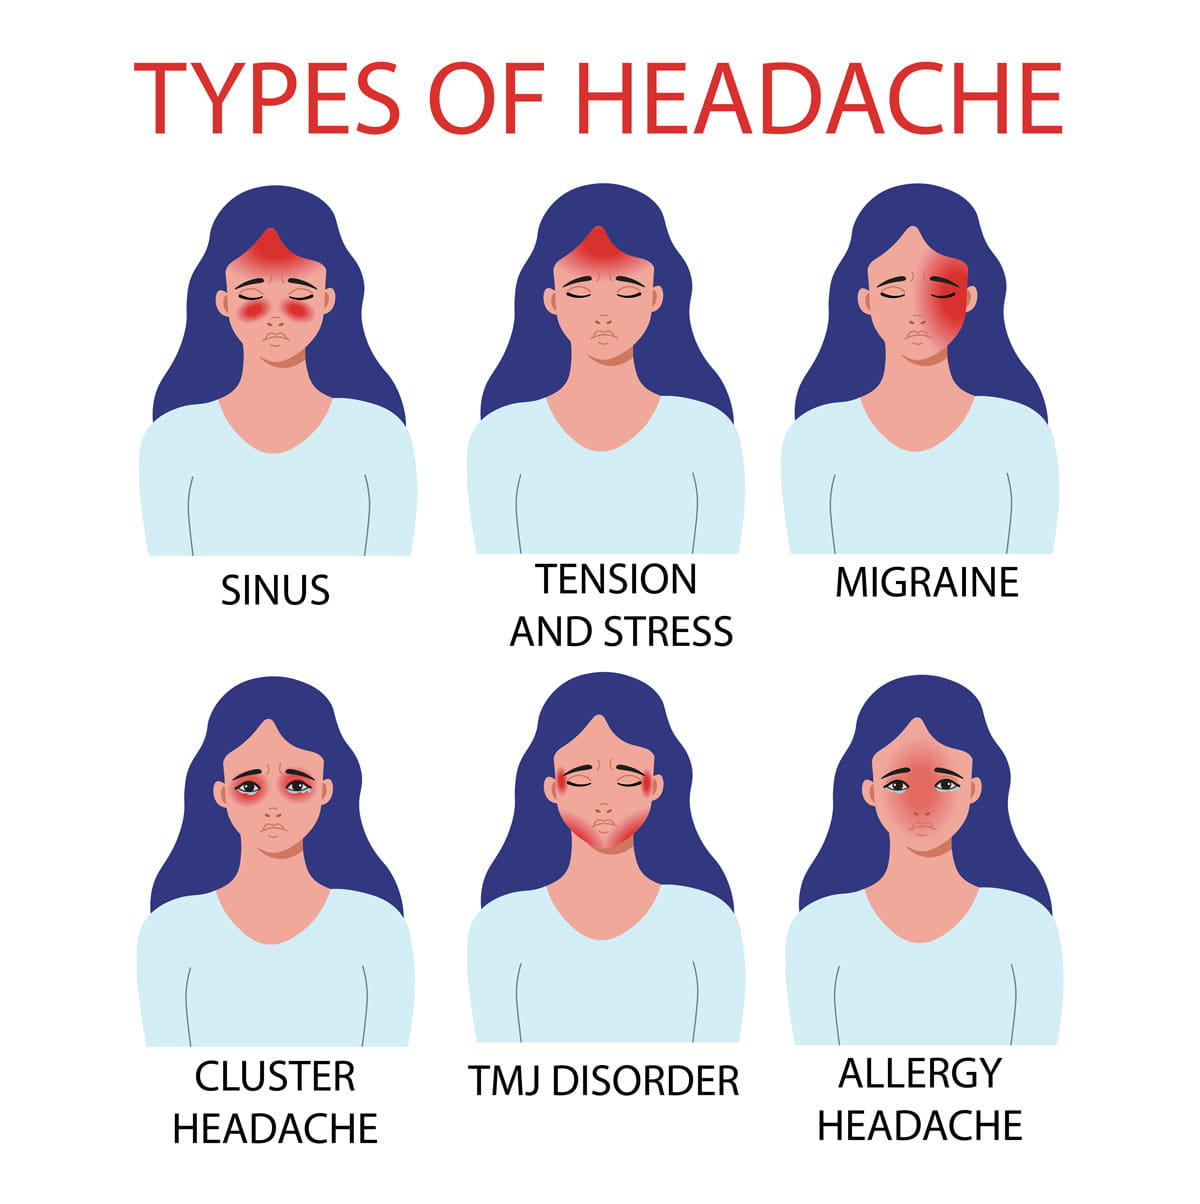 Types Of Headaches graphic- sinus, tension/stress, migraine, cluster, allergy, TMJ